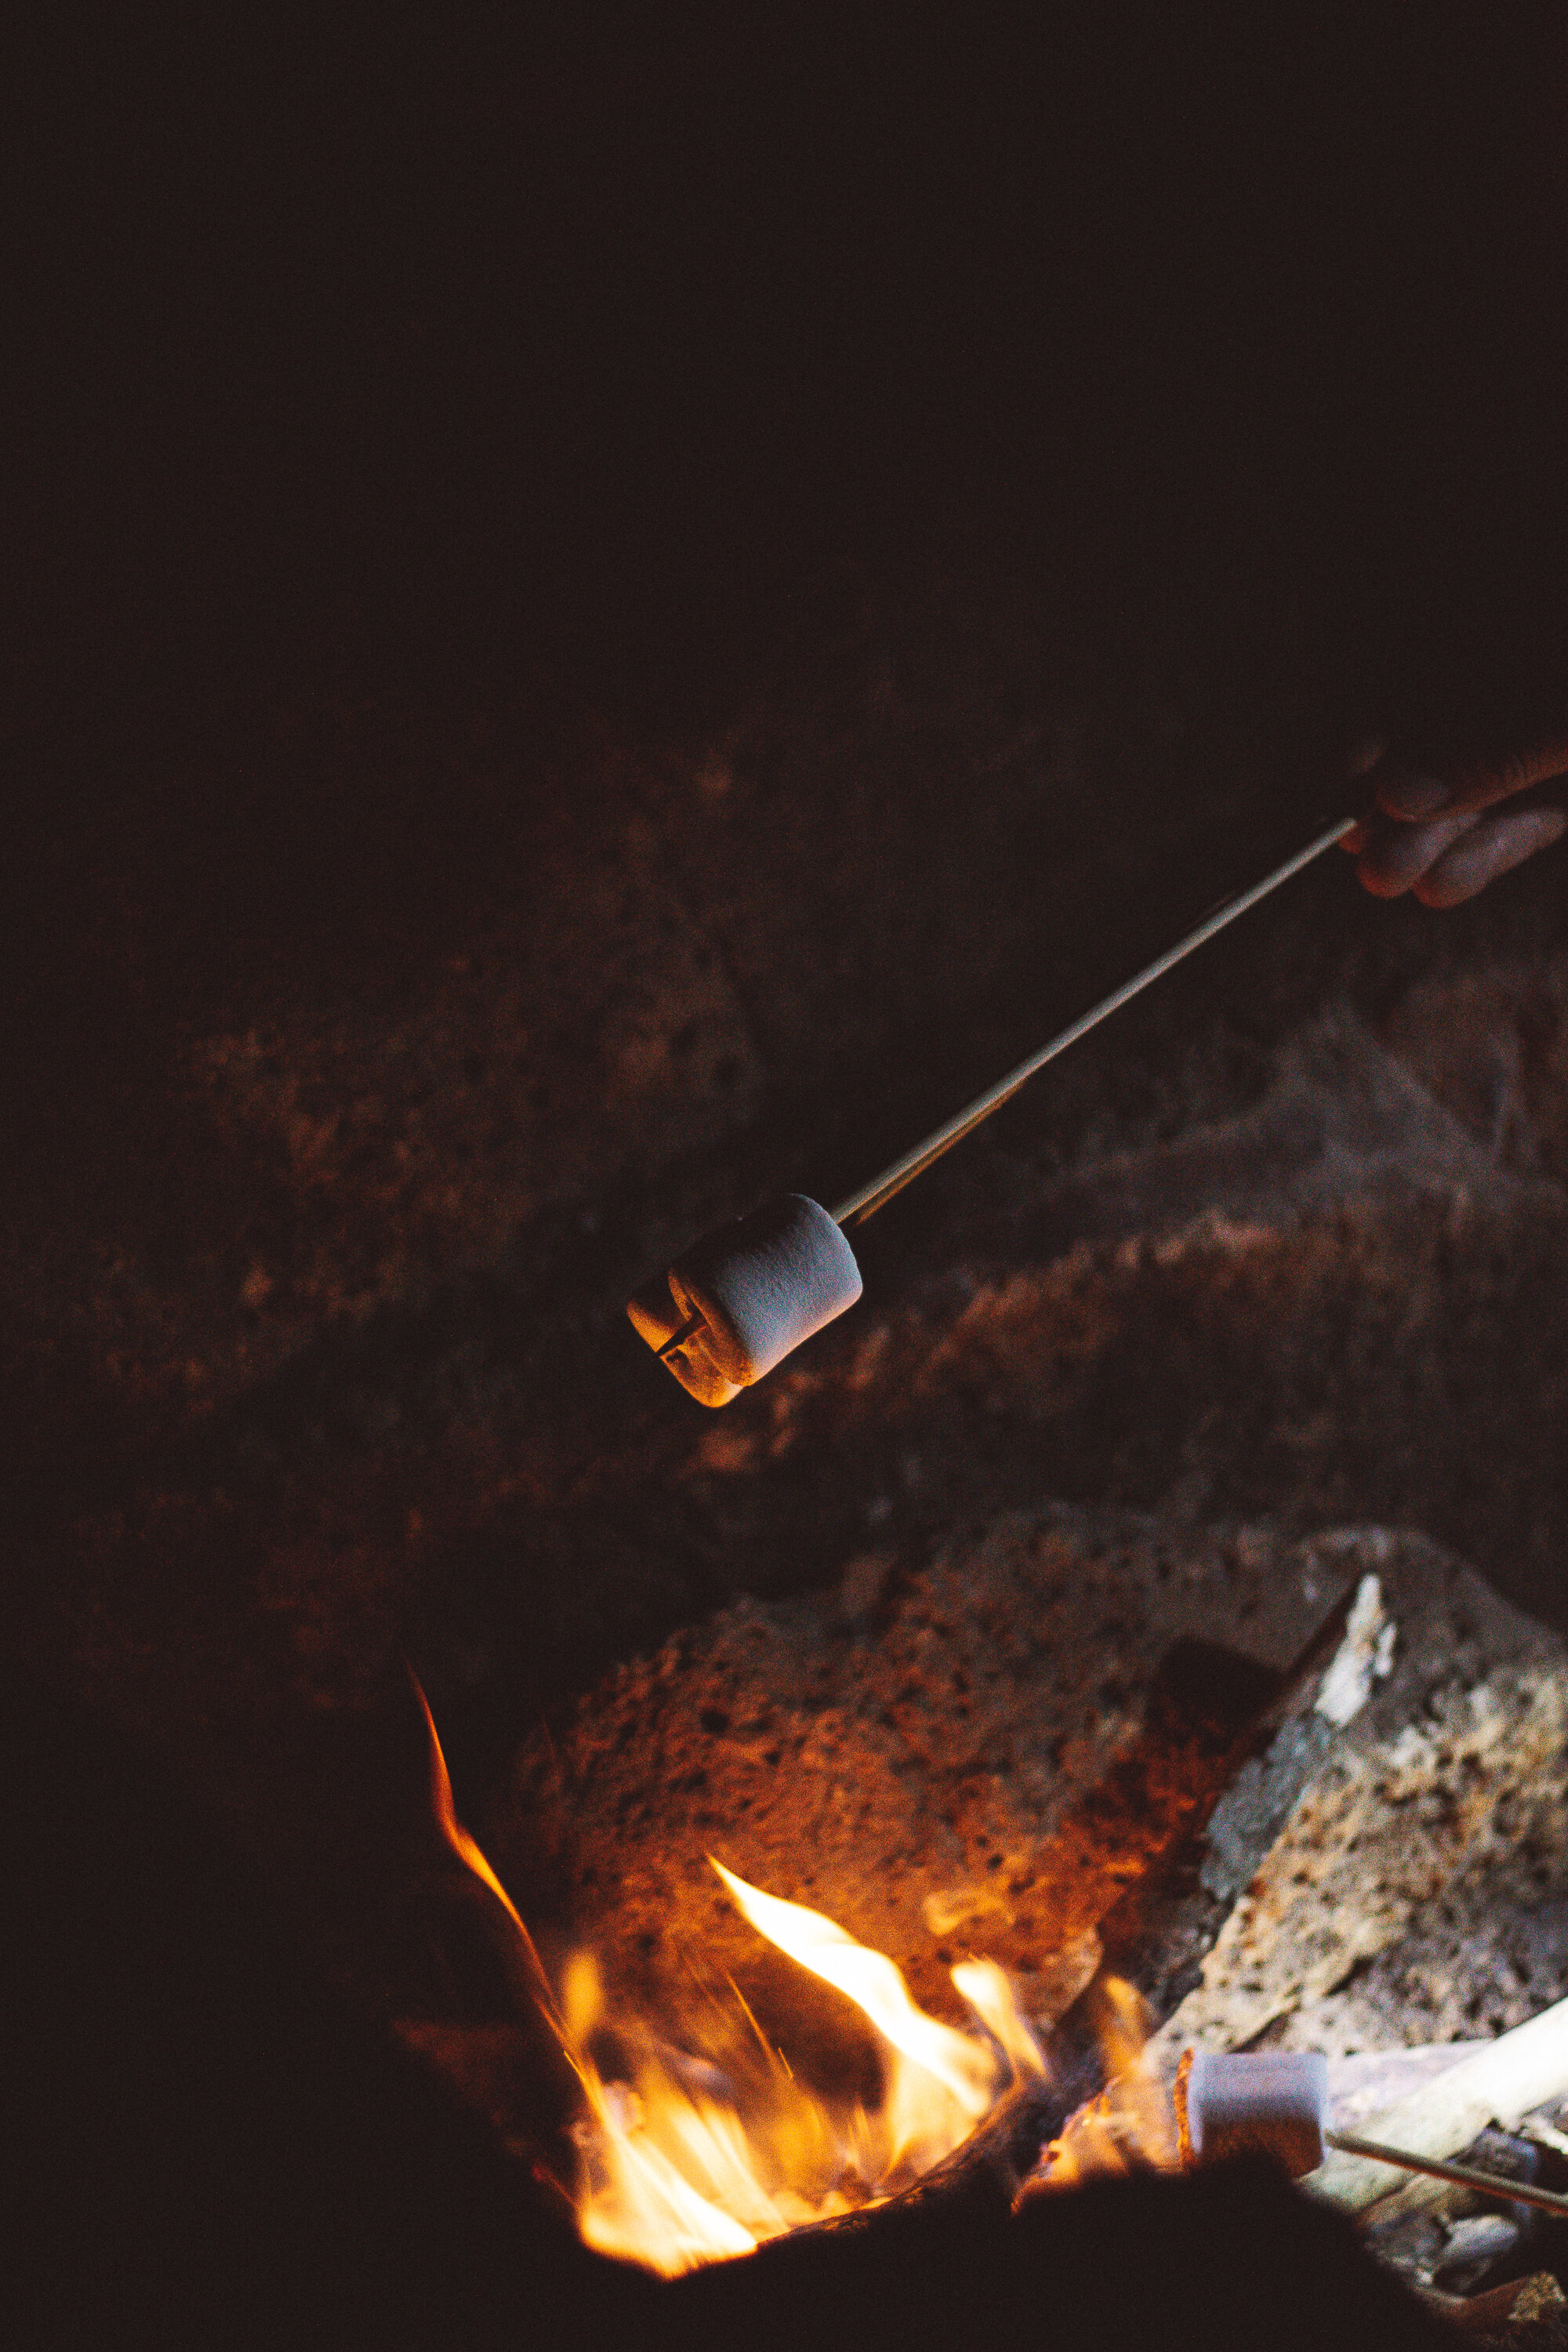 marshmallow-grilled-on-fire-1752951.jpg